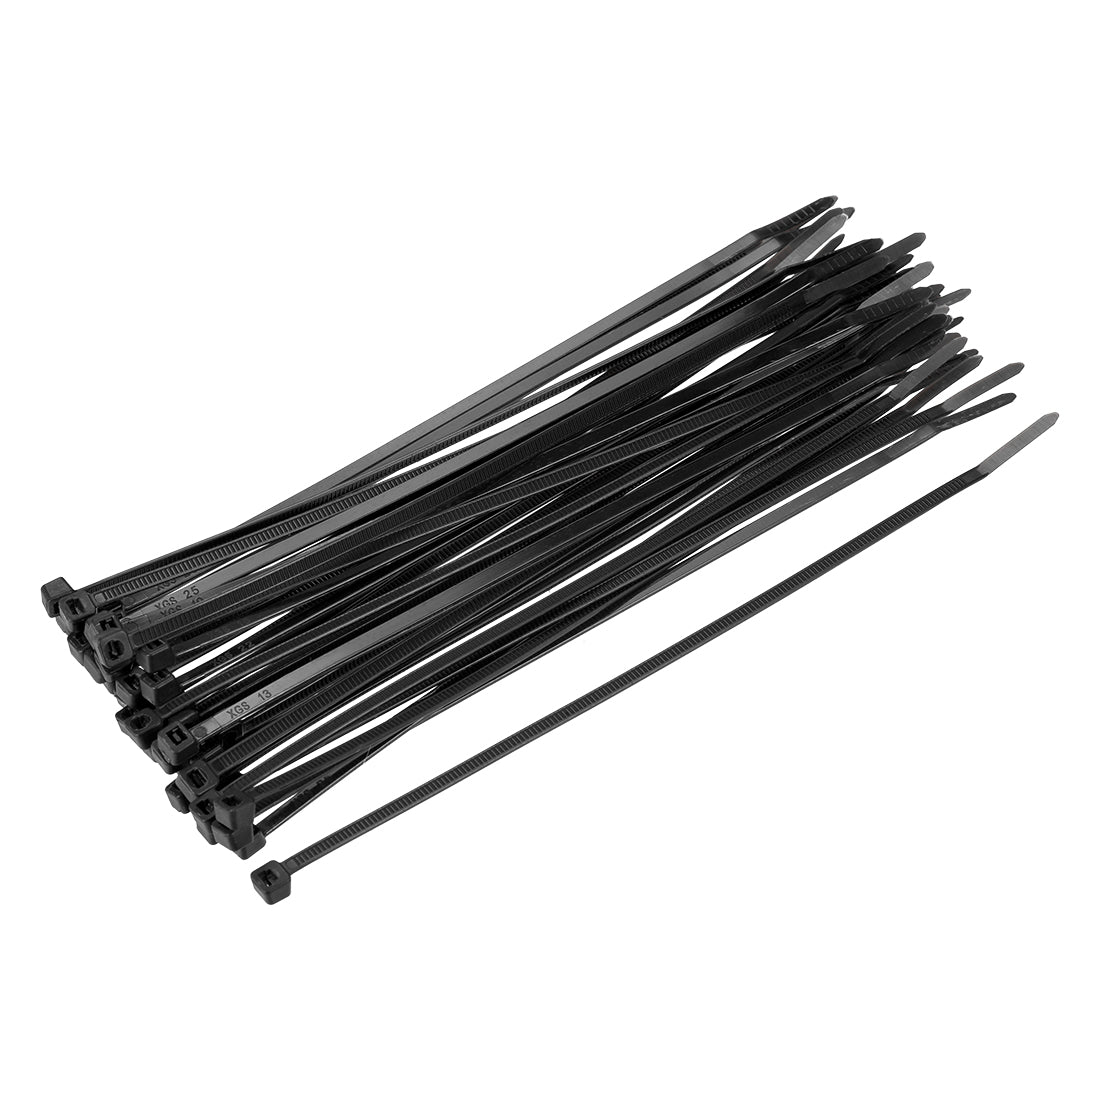 uxcell Uxcell Cable Zip Ties 200mmx4mm Self-Locking Nylon Tie Wraps Black 150pcs